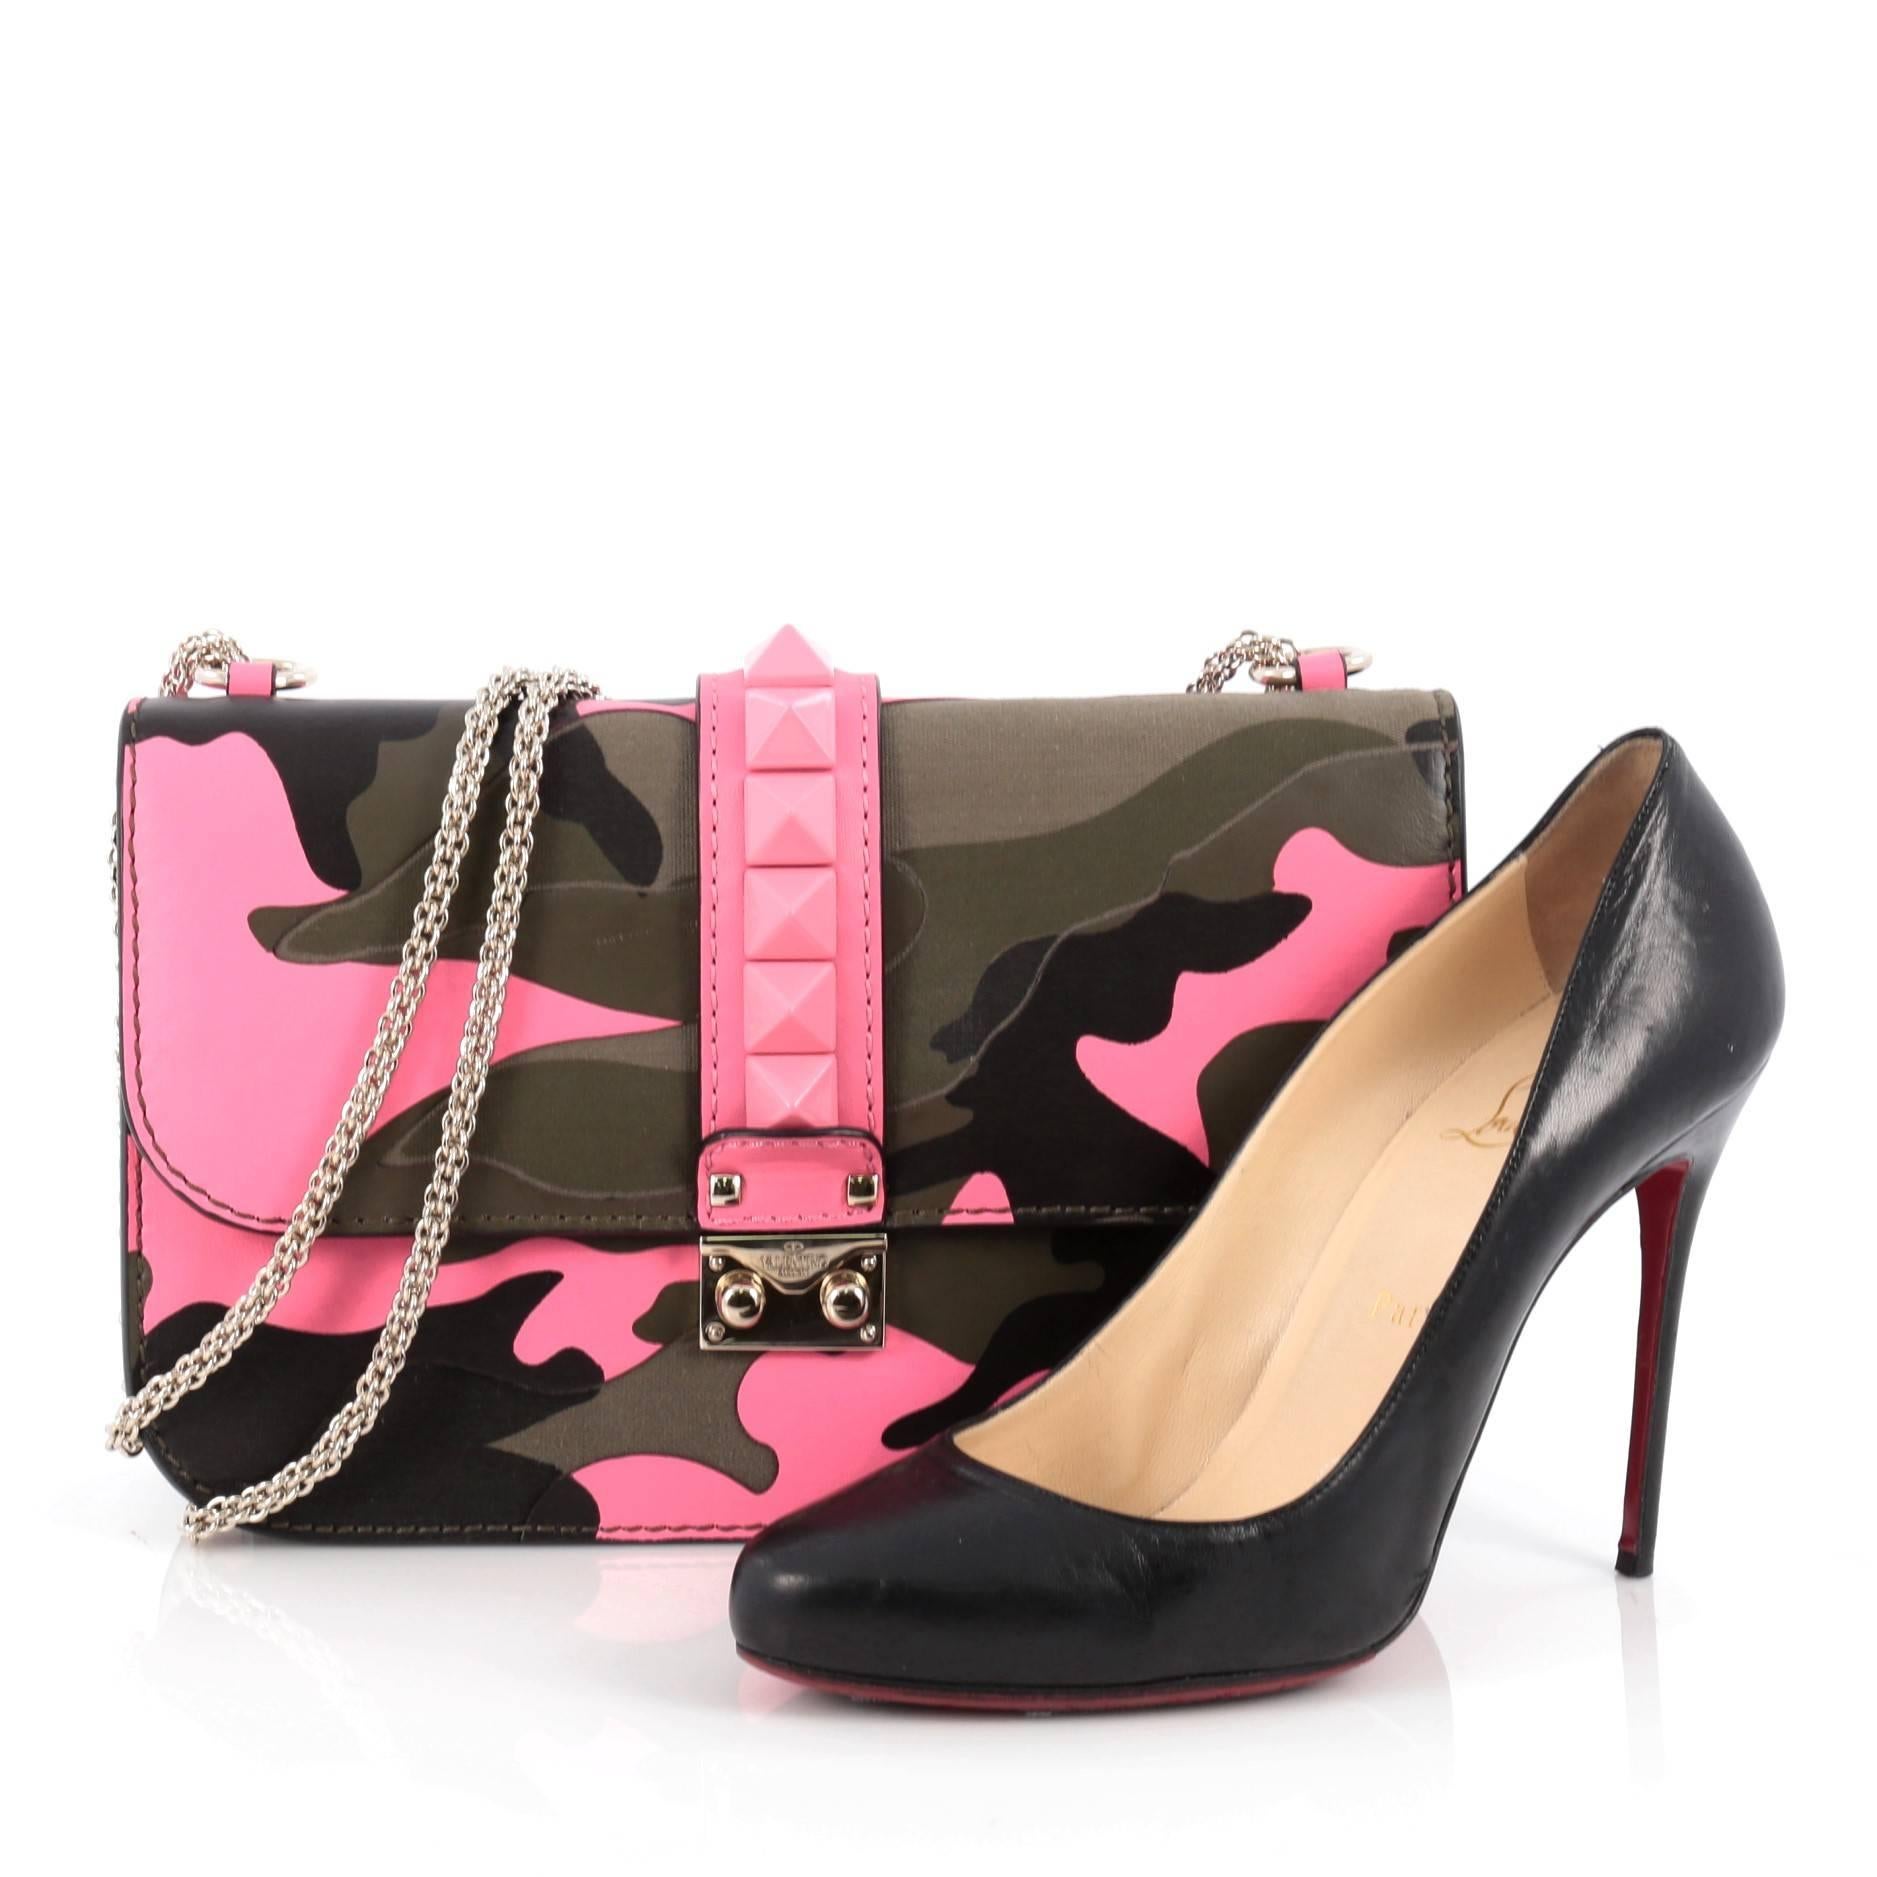 This authentic Valentino Glam Lock Shoulder Bag Camo Leather and Canvas Medium presented in the brand's Spring 2014 Collection is a fun, exciting and bold accessory perfect for nights out. Crafted from pink, khaki green camo leather and canvas with